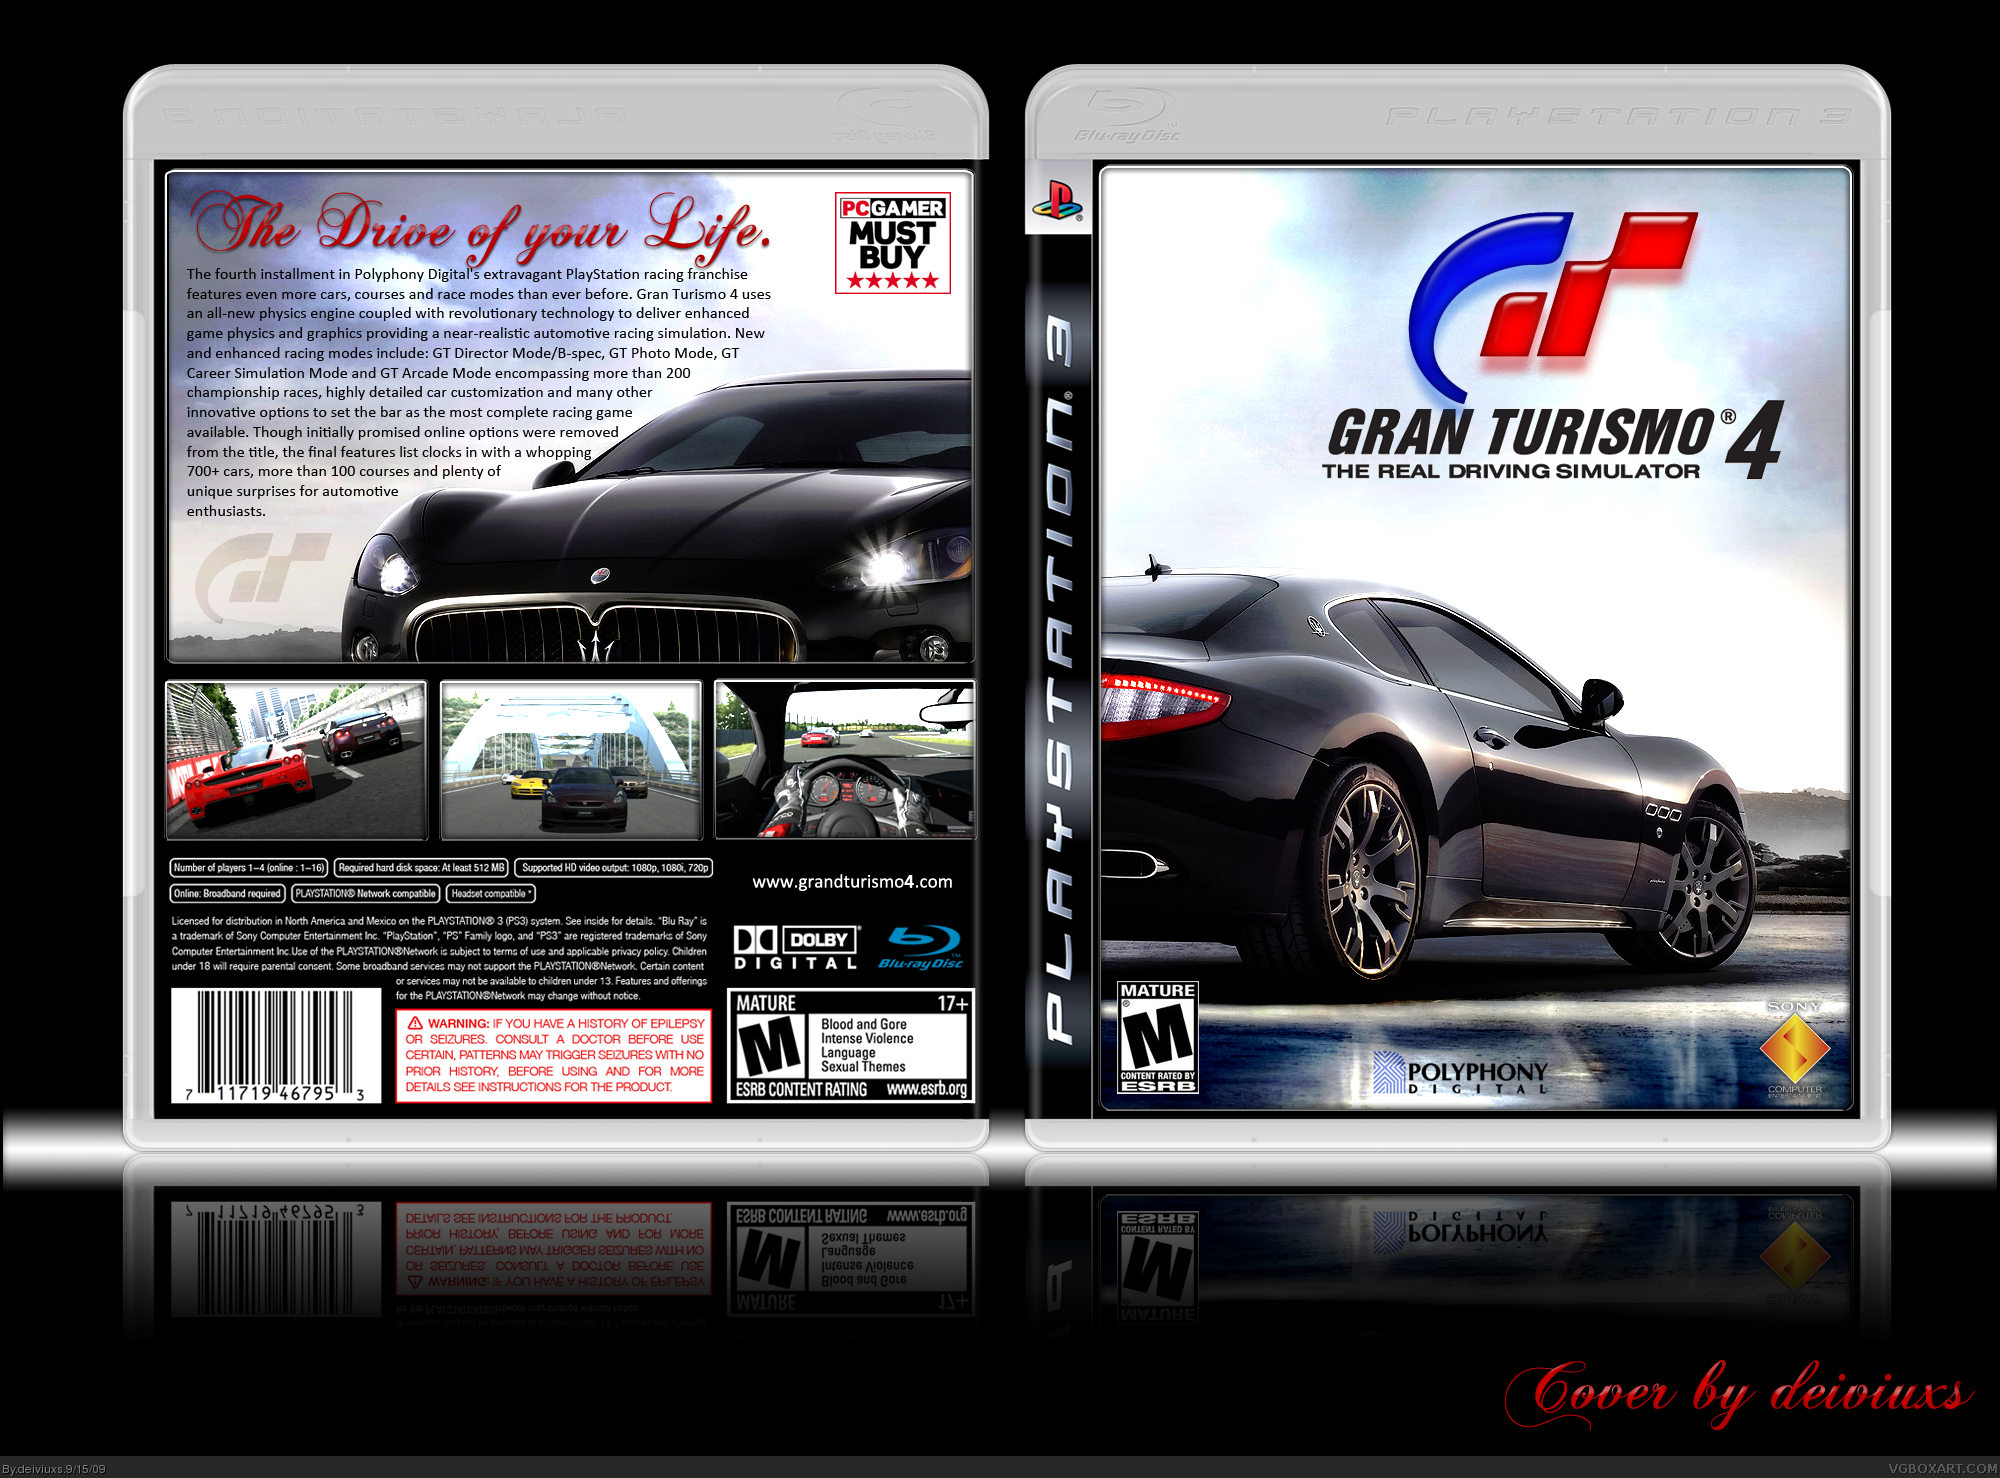 Grand Turismo 4 PSP Box Art Cover by sonic11